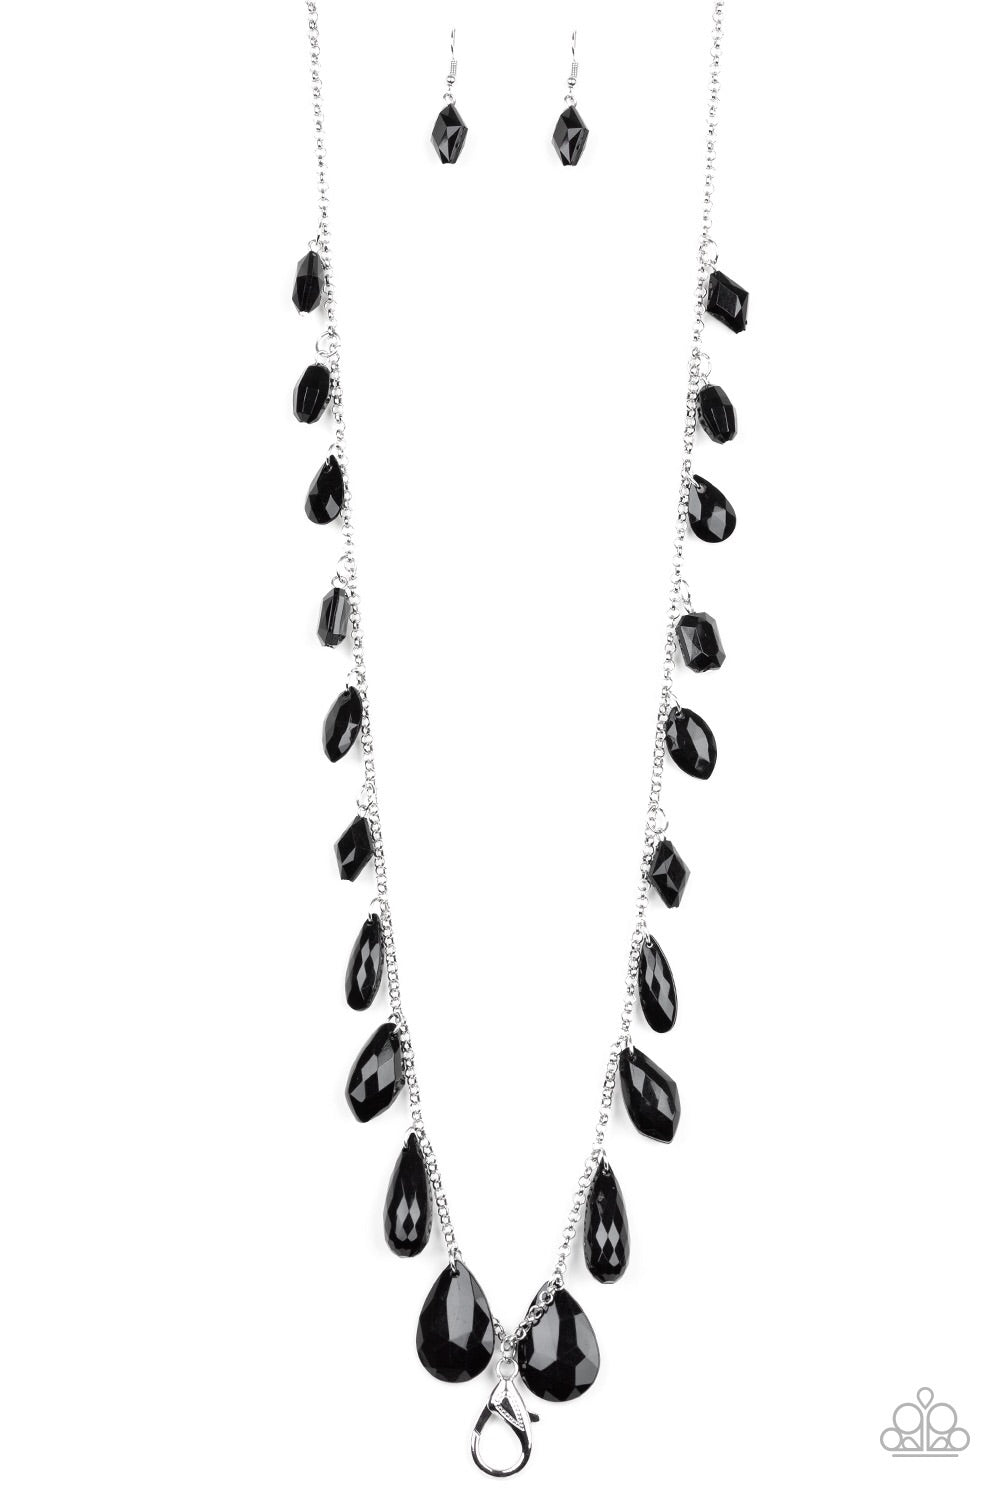 Paparazzi GLOW And Steady Wins The Race Necklace- Black Lanyard